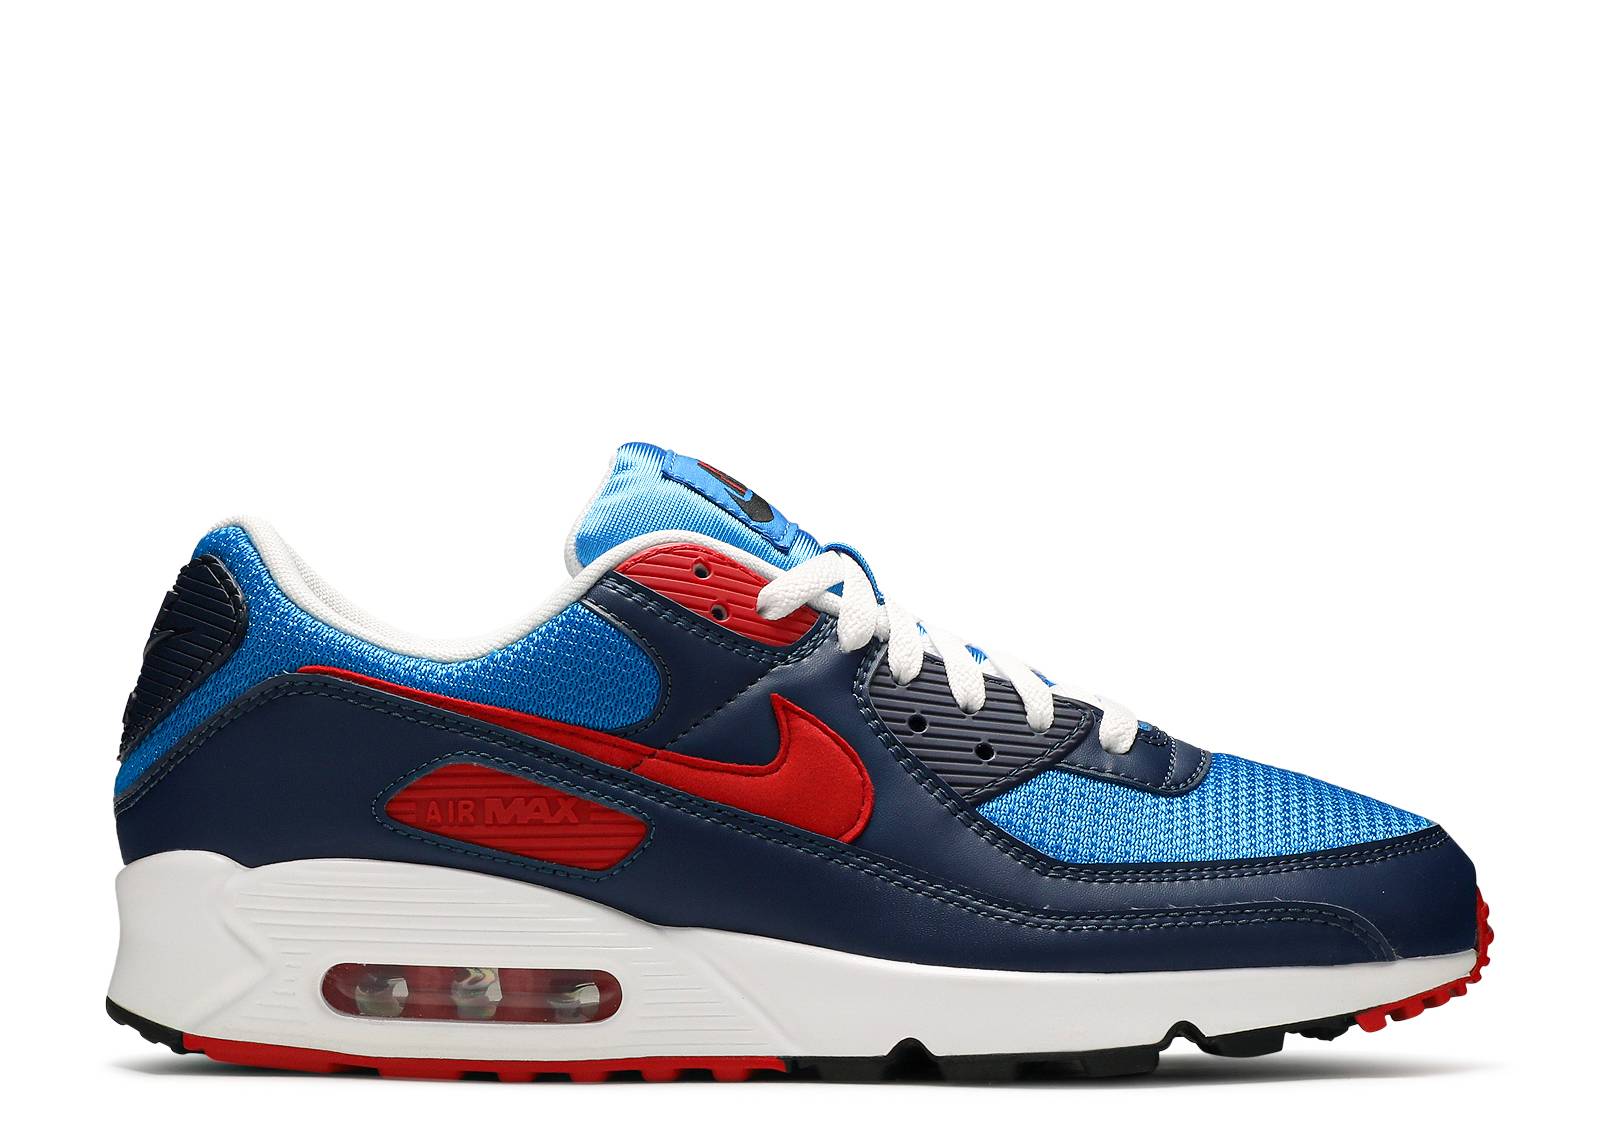 Air Max 90 'Photo Blue University Red'